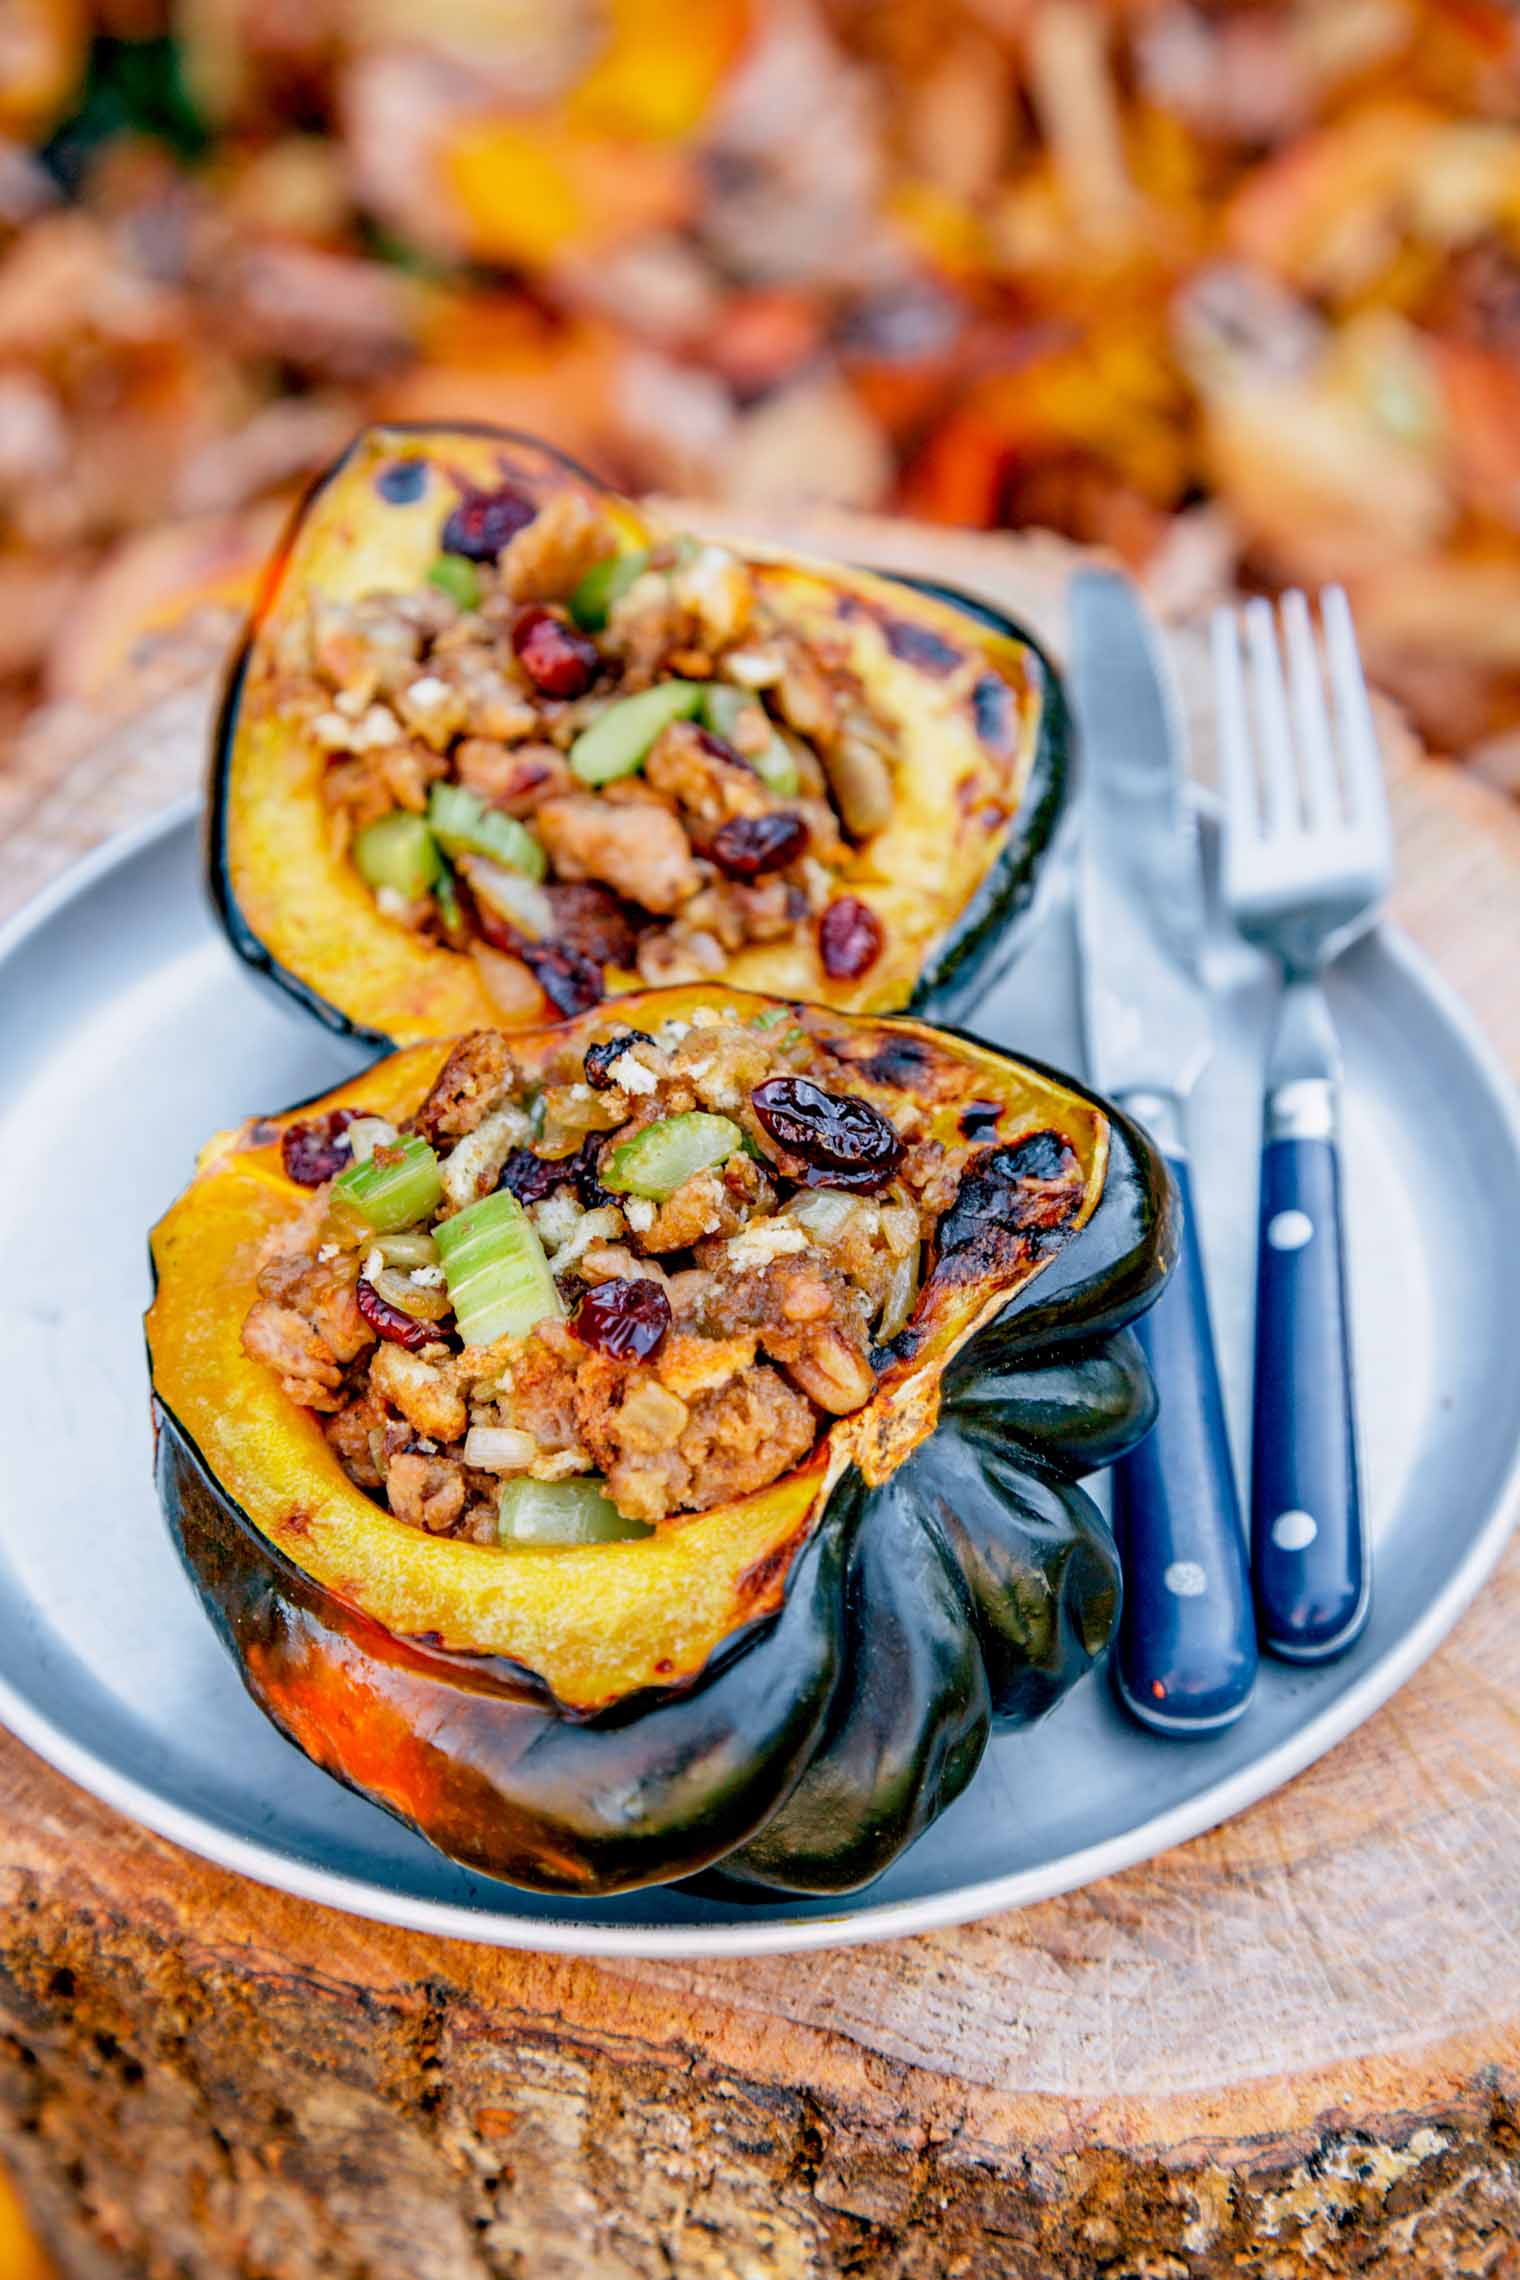 Two pieces of Roasted stuffed squash on a plate